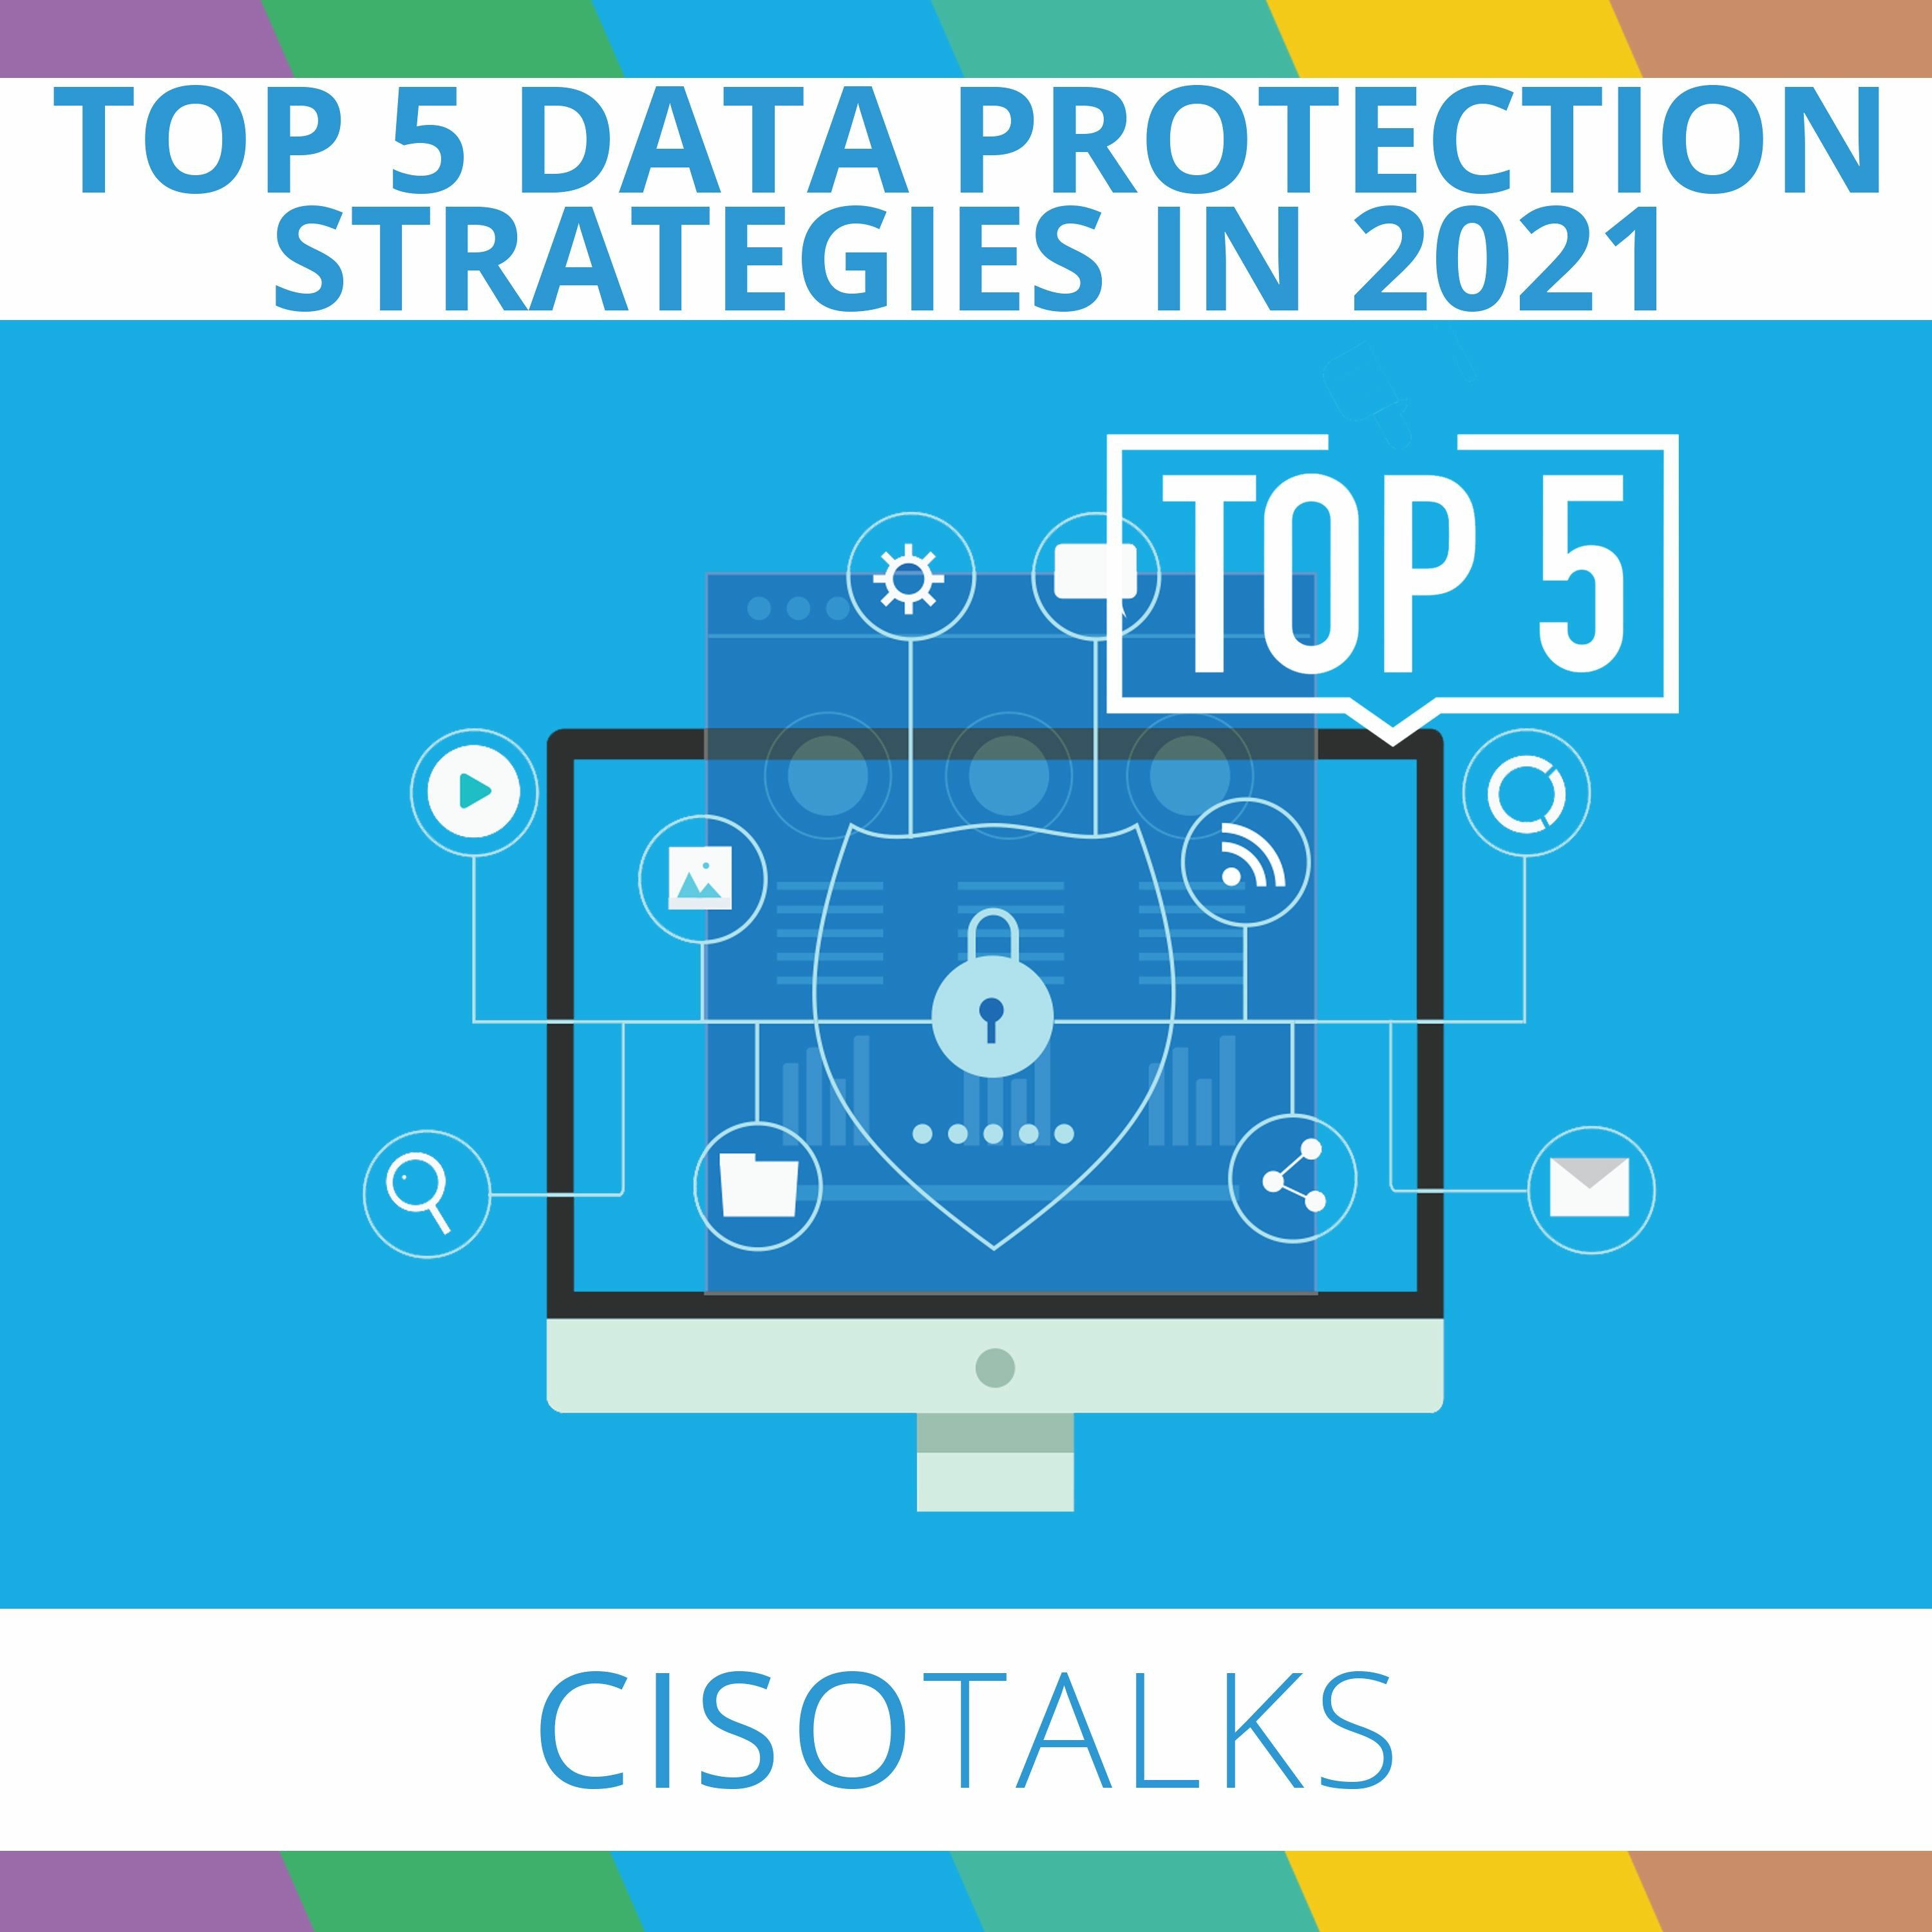 Top 5 Data Protection Strategies in 2021 | CISO Talks